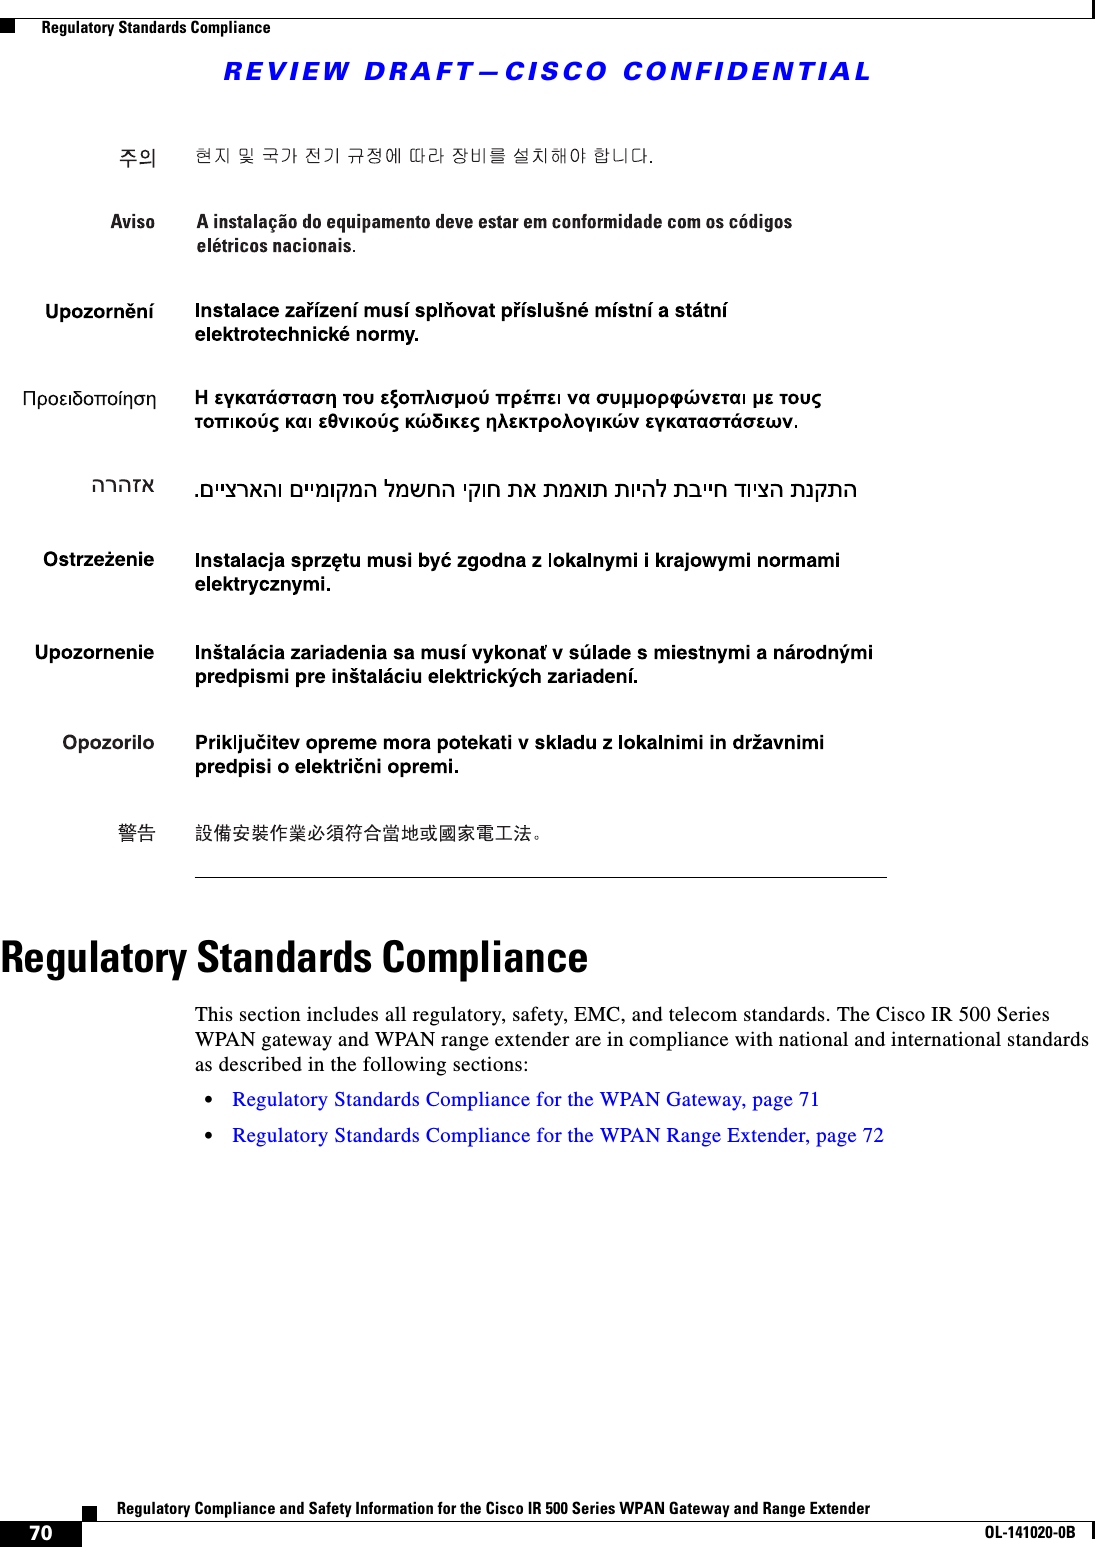 REVIEW DRAFT—CISCO CONFIDENTIAL70Regulatory Compliance and Safety Information for the Cisco IR 500 Series WPAN Gateway and Range ExtenderOL-141020-0B  Regulatory Standards ComplianceRegulatory Standards ComplianceThis section includes all regulatory, safety, EMC, and telecom standards. The Cisco IR 500 Series WPAN gateway and WPAN range extender are in compliance with national and international standards as described in the following sections:•Regulatory Standards Compliance for the WPAN Gateway, page 71•Regulatory Standards Compliance for the WPAN Range Extender, page 72